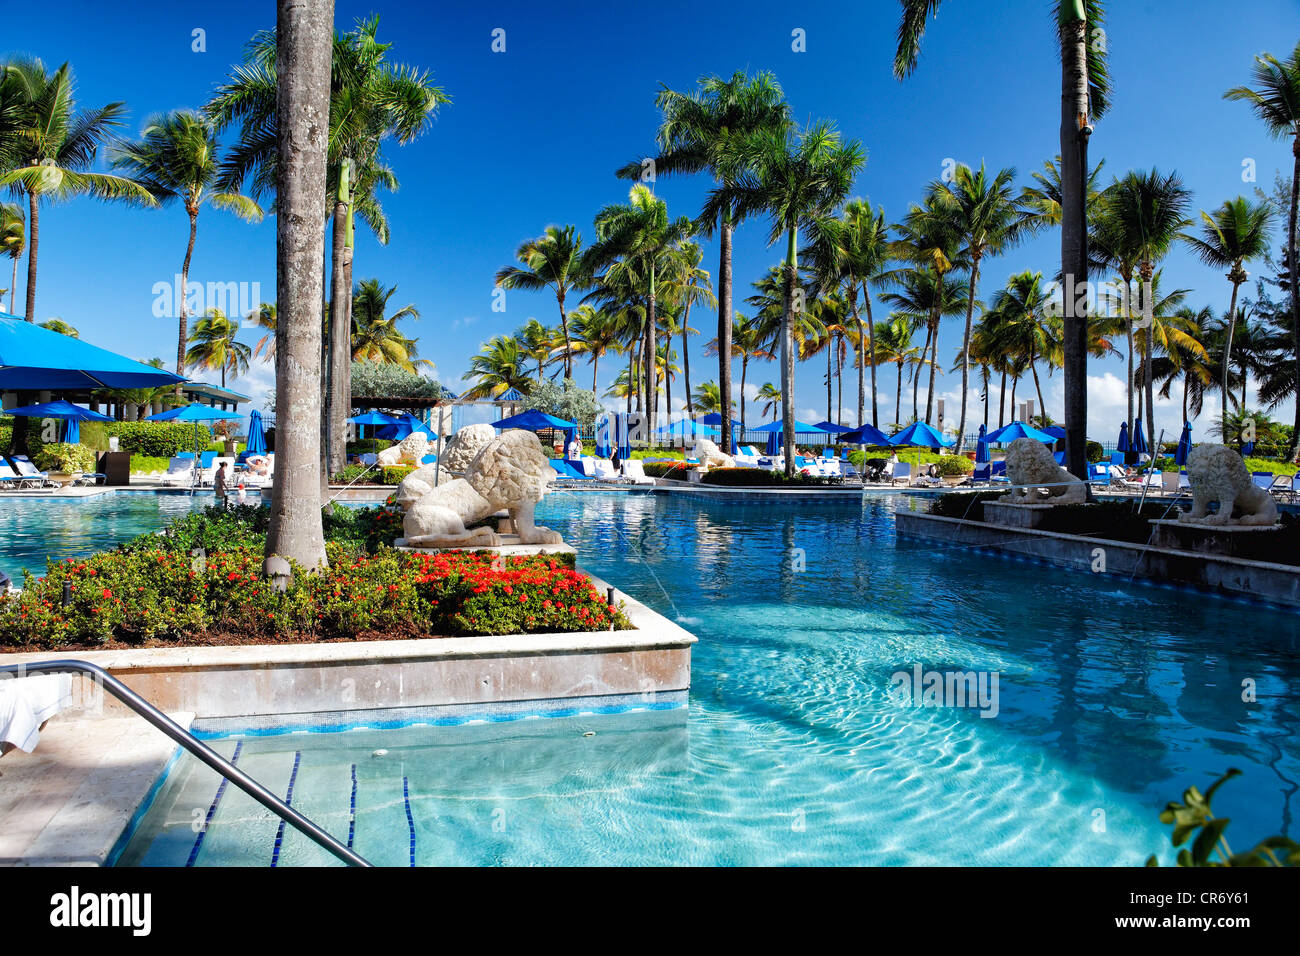 Pool with Palm Trees and Lion Wate Spouts, Ritz-Carlton resort Hotel, San Juan, Puerto Rico Stock Photo